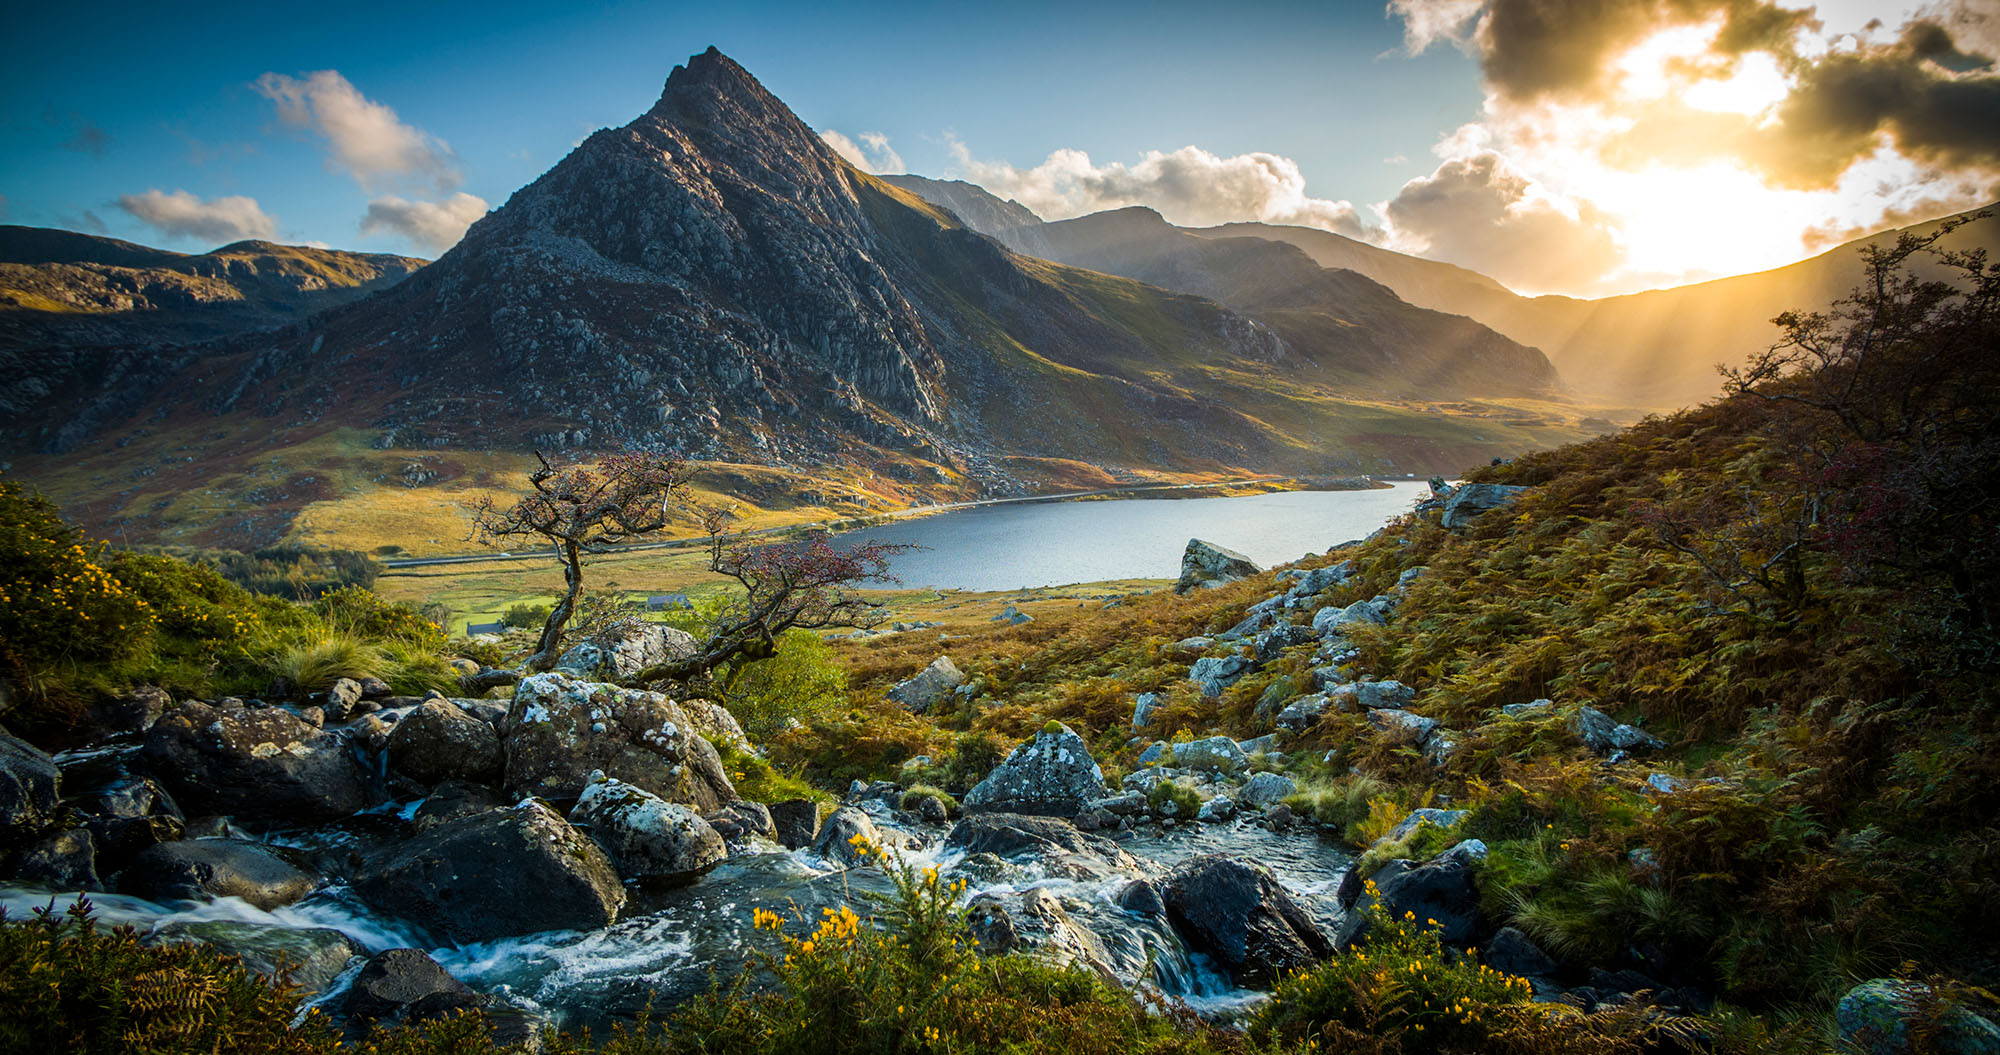 Hike in Snowdonia National Park, Wales